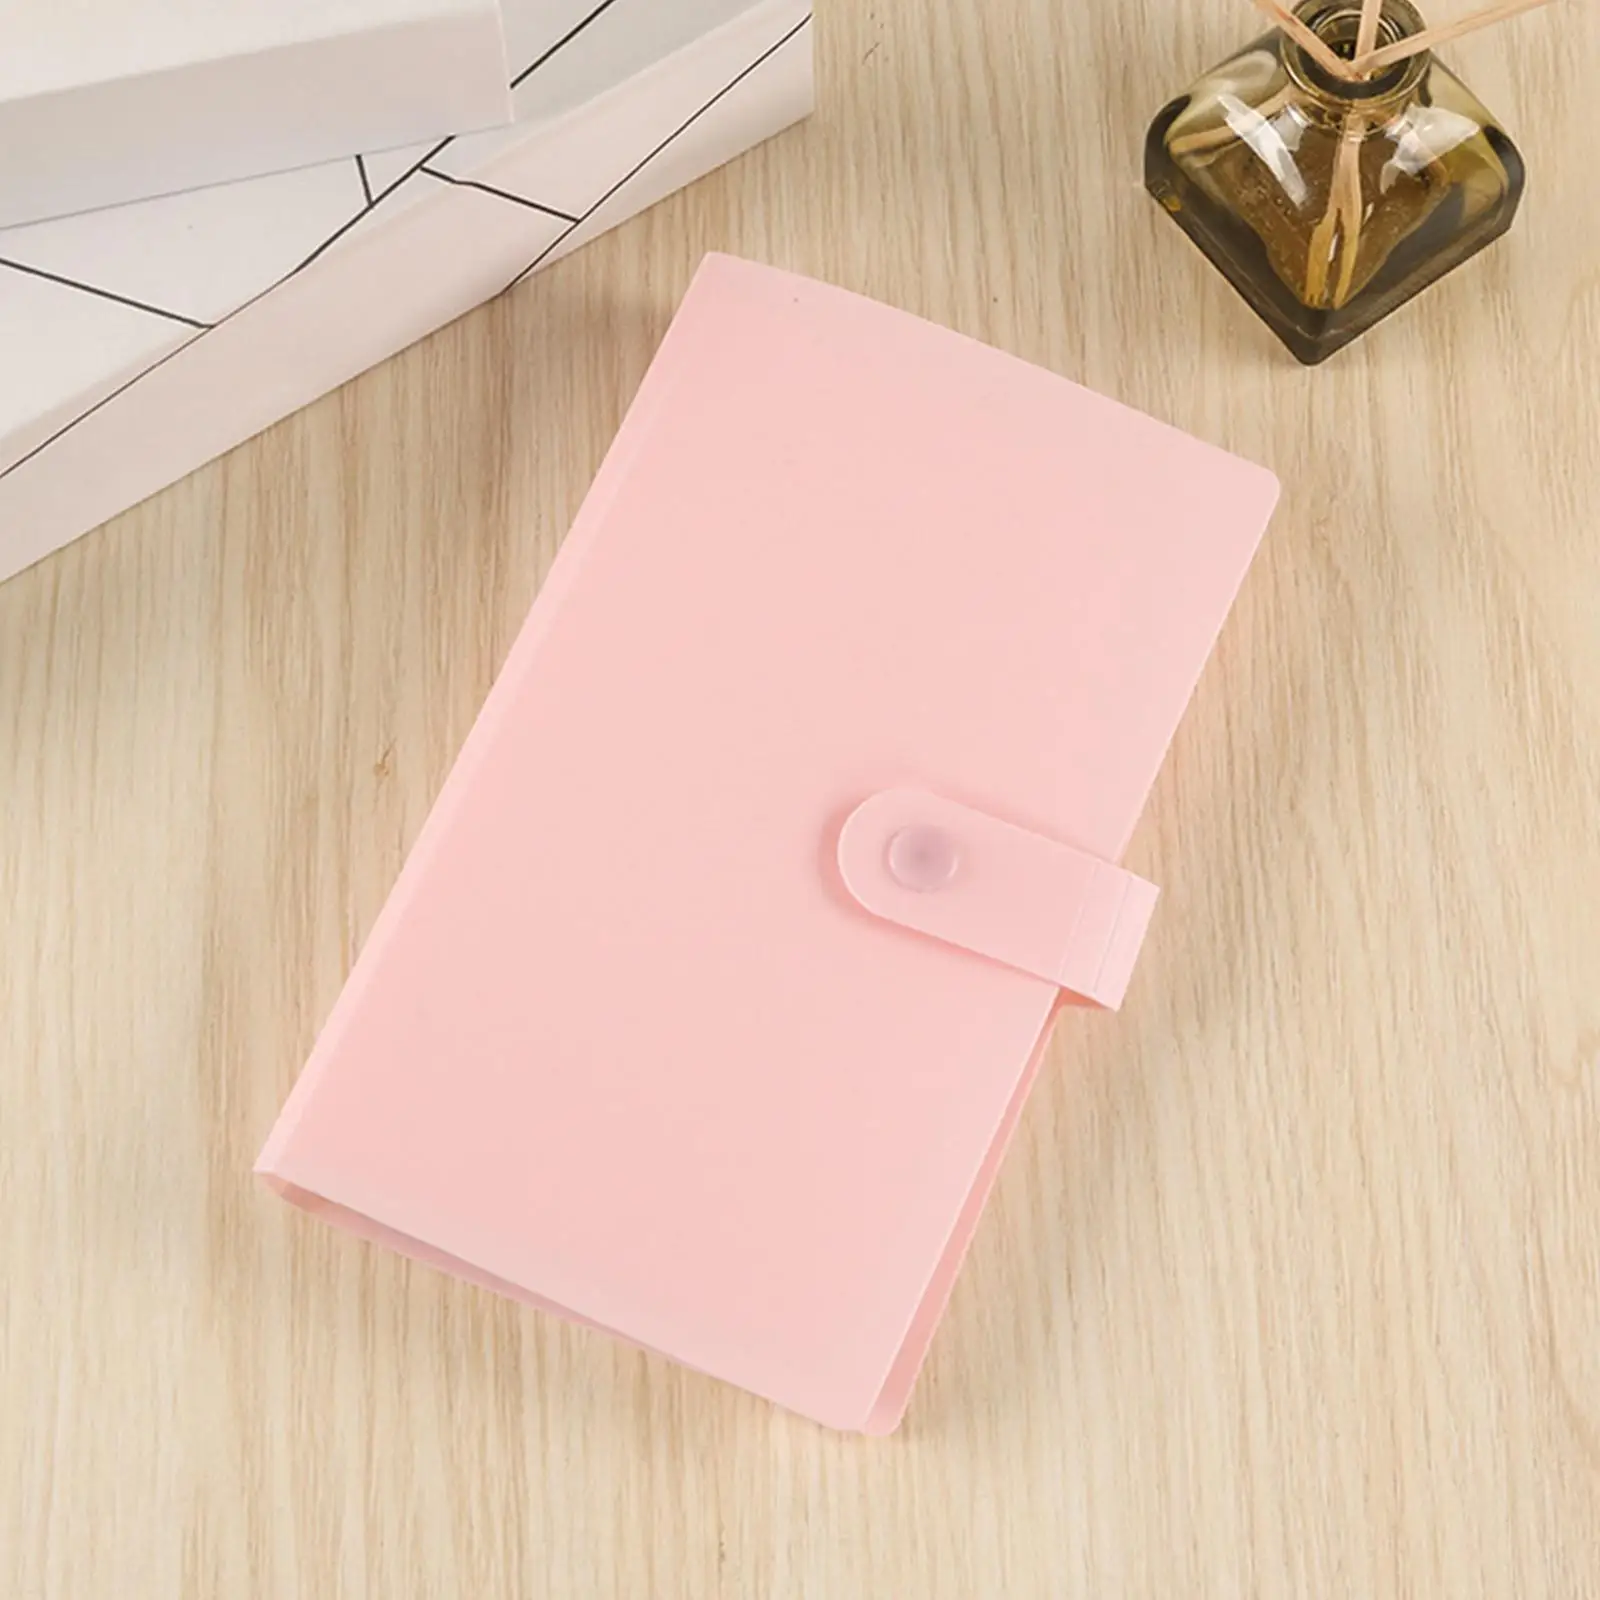 PVC Card Holder Protector Sleeve Card Collectible Protective Cover Card Sleeves Trading Card Binder for Credit Cards Bank Cards